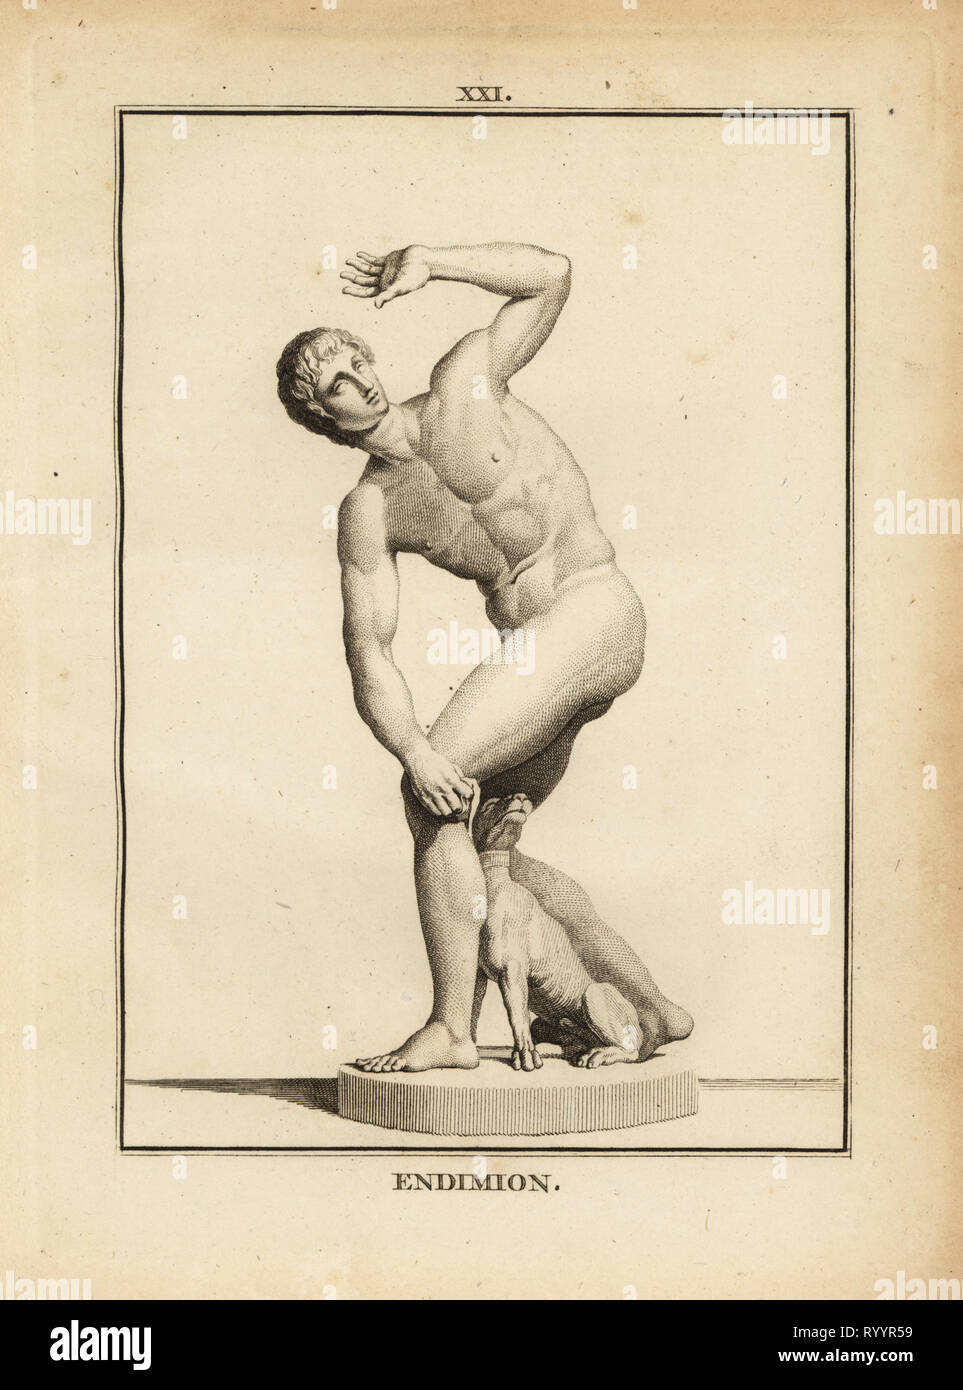 Statue of Endymion, Greek shepherd. Copperplate engraving by Francois-Anne David from Museum de Florence, ou Collection des Pierres Gravees, Statues, Medailles, Chez F.A. David, Paris, 1787. David (1741-1824) drew and engraved the illustrations based on Roman statues, engraved stones and medals in the collection of the Museum de Florence and the cabinet of curiosities of the Grand Duke of Tuscany. Stock Photo